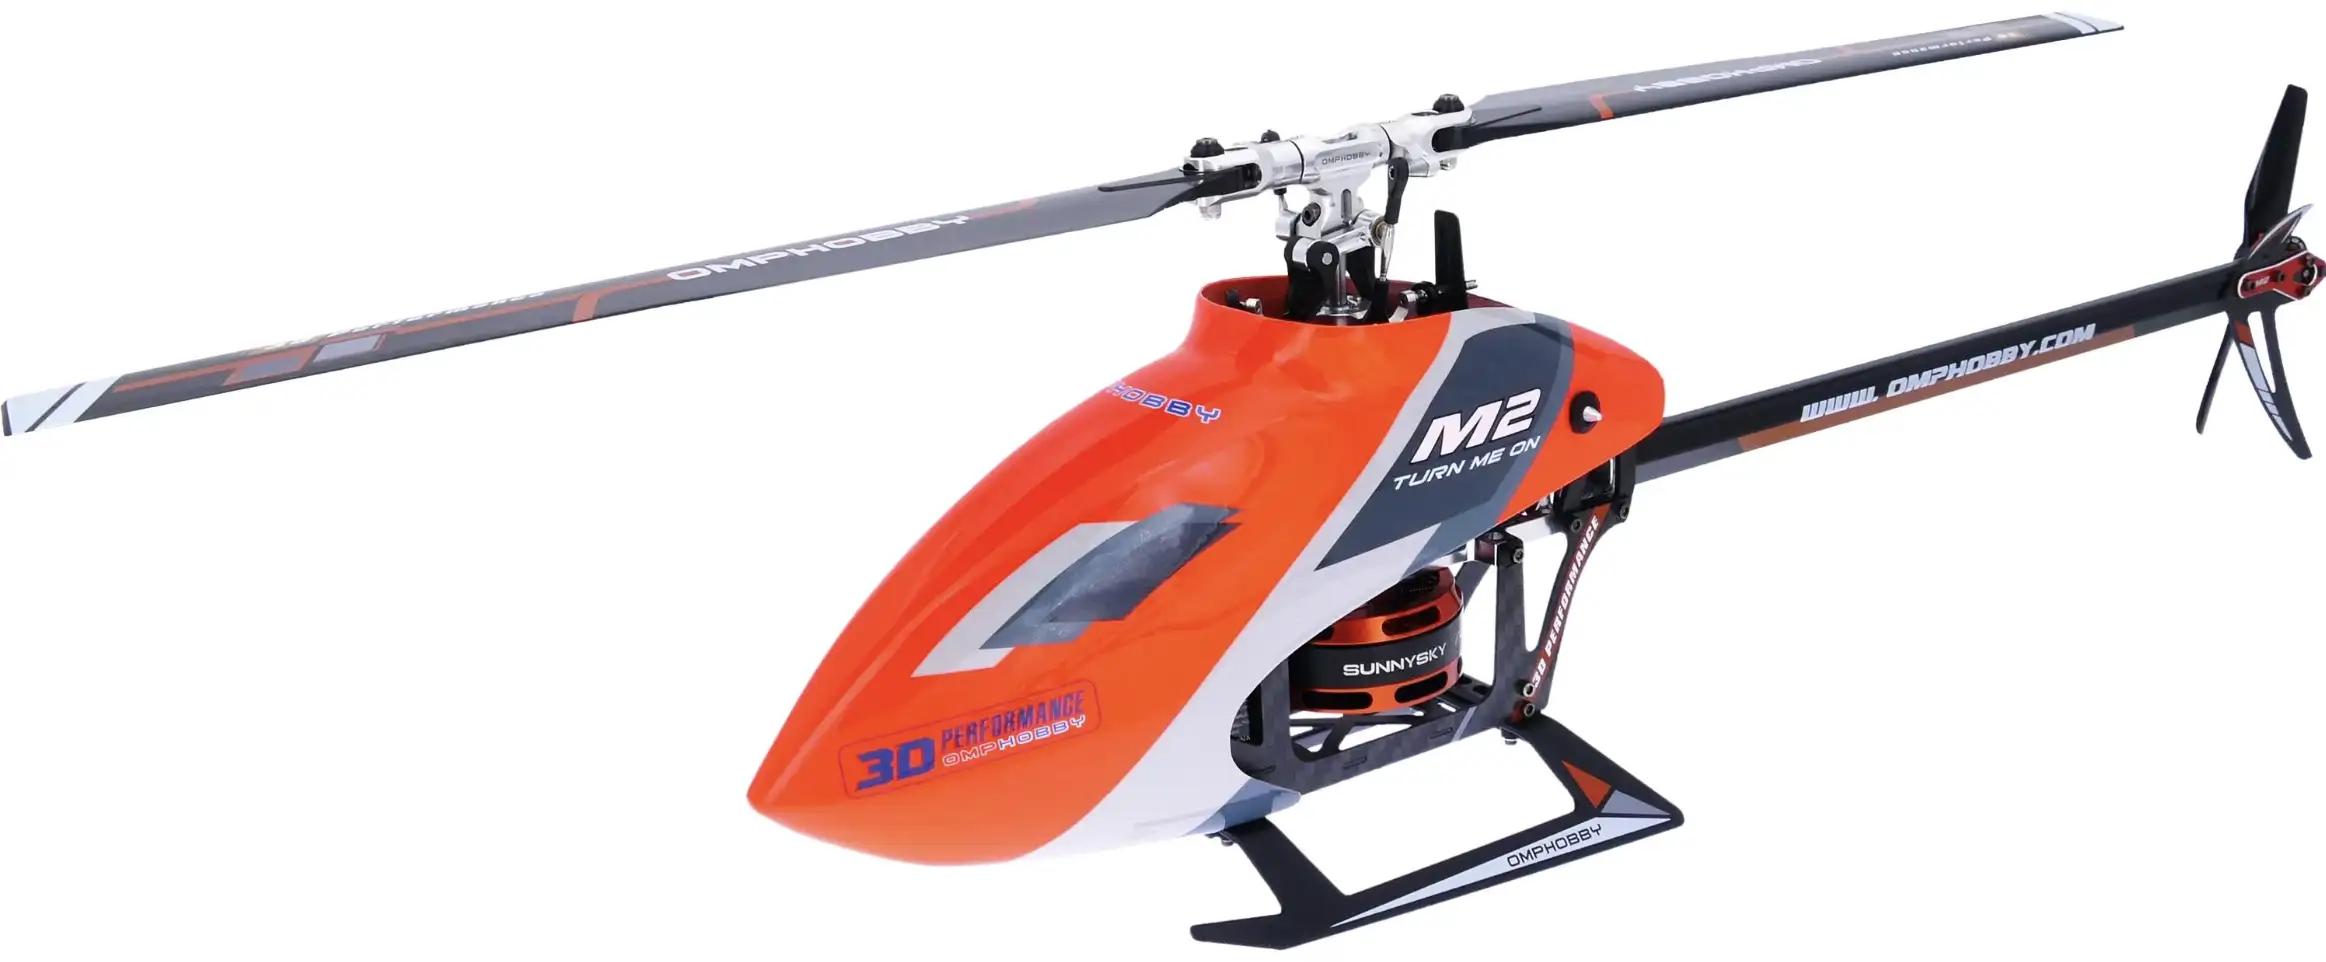 Learning to fly an RC helicopter